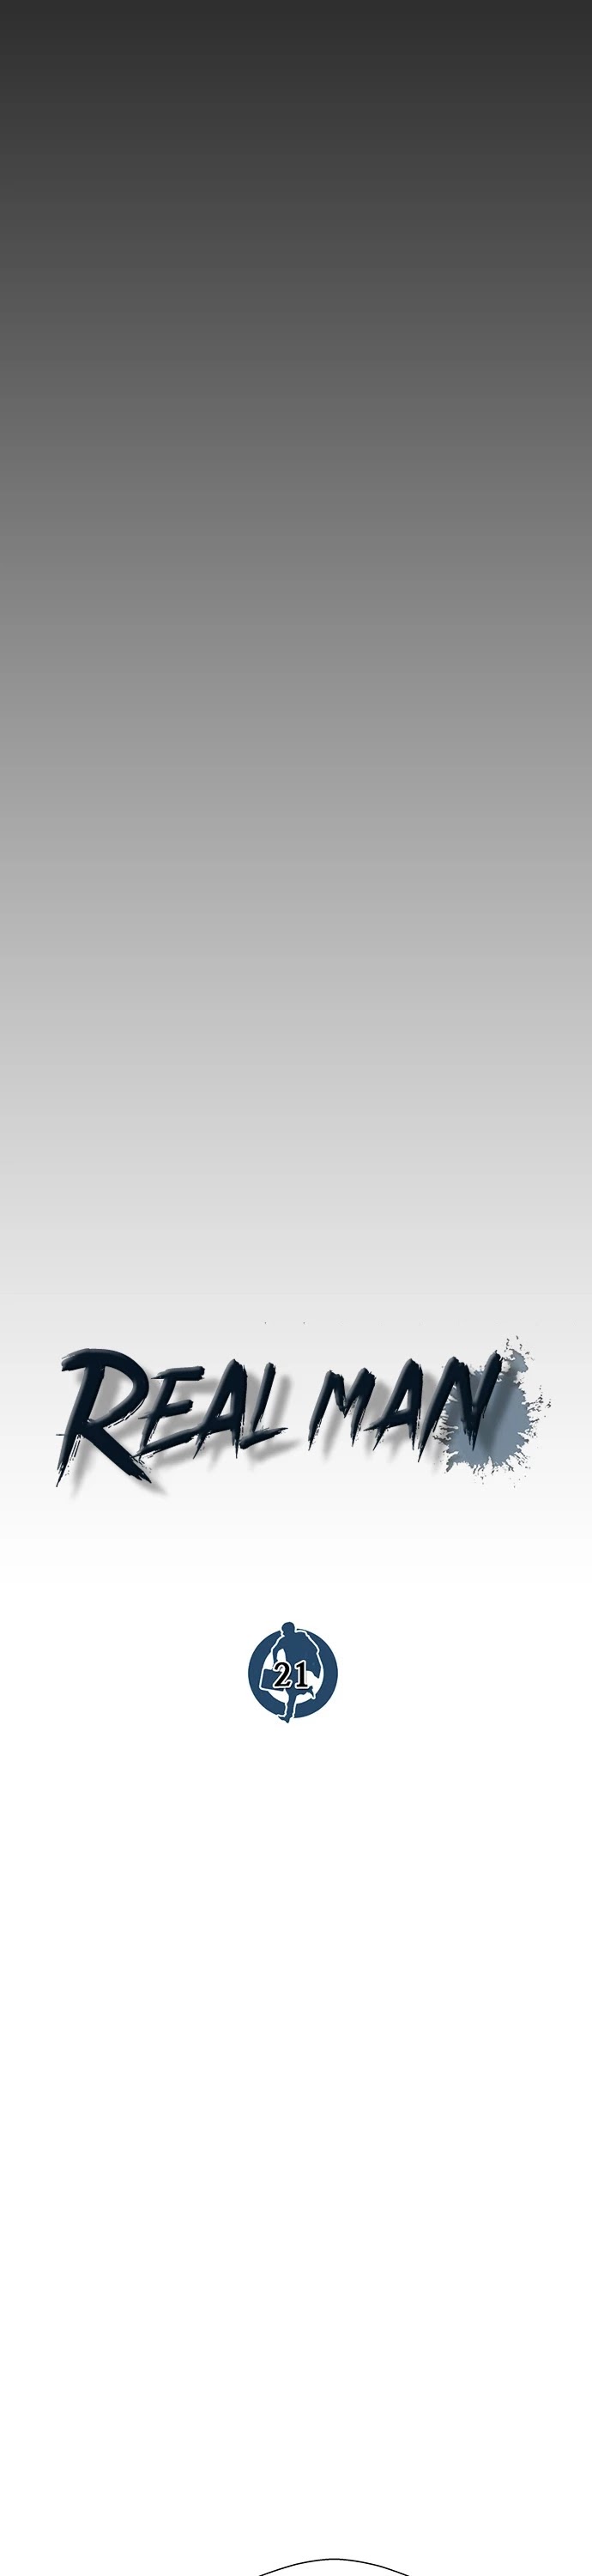 Real Man - Page 3